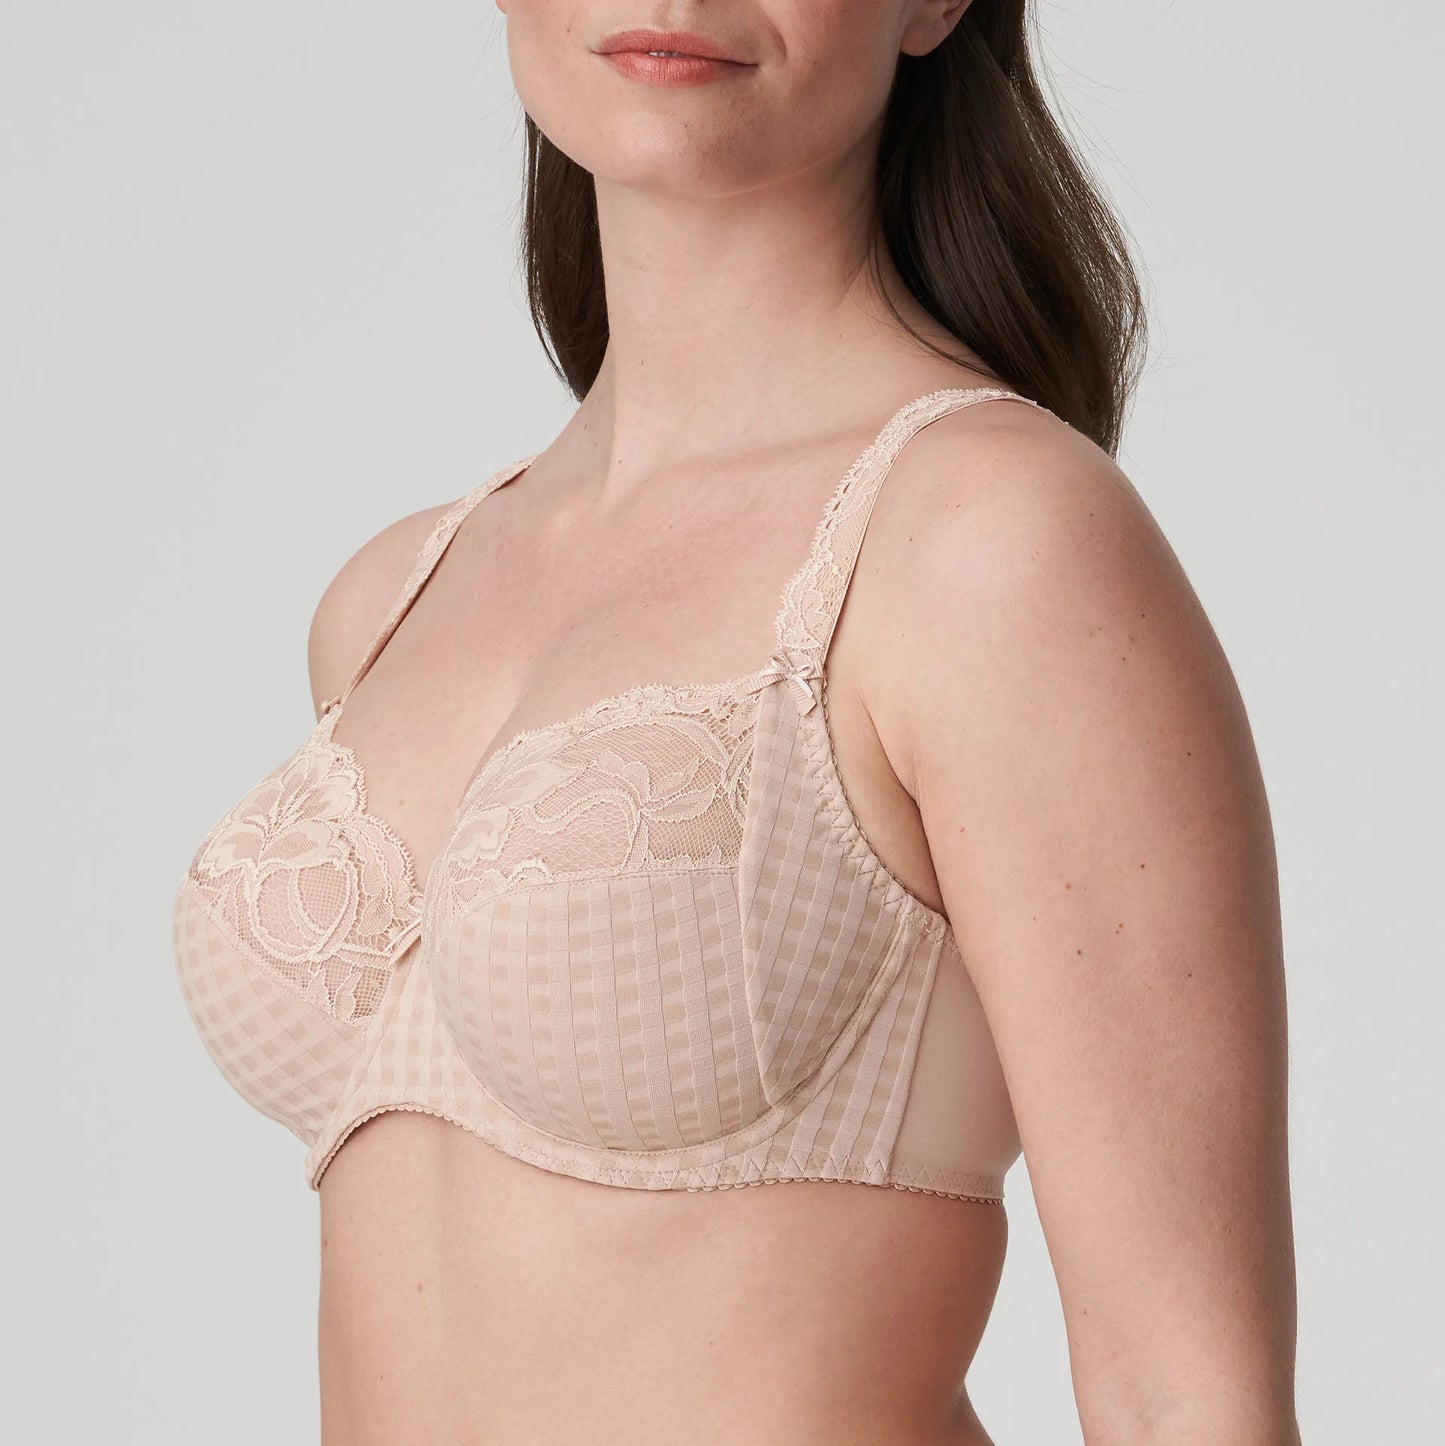 Madison Full Cup Underwire Bra in Caffe Latte worn by model side view image